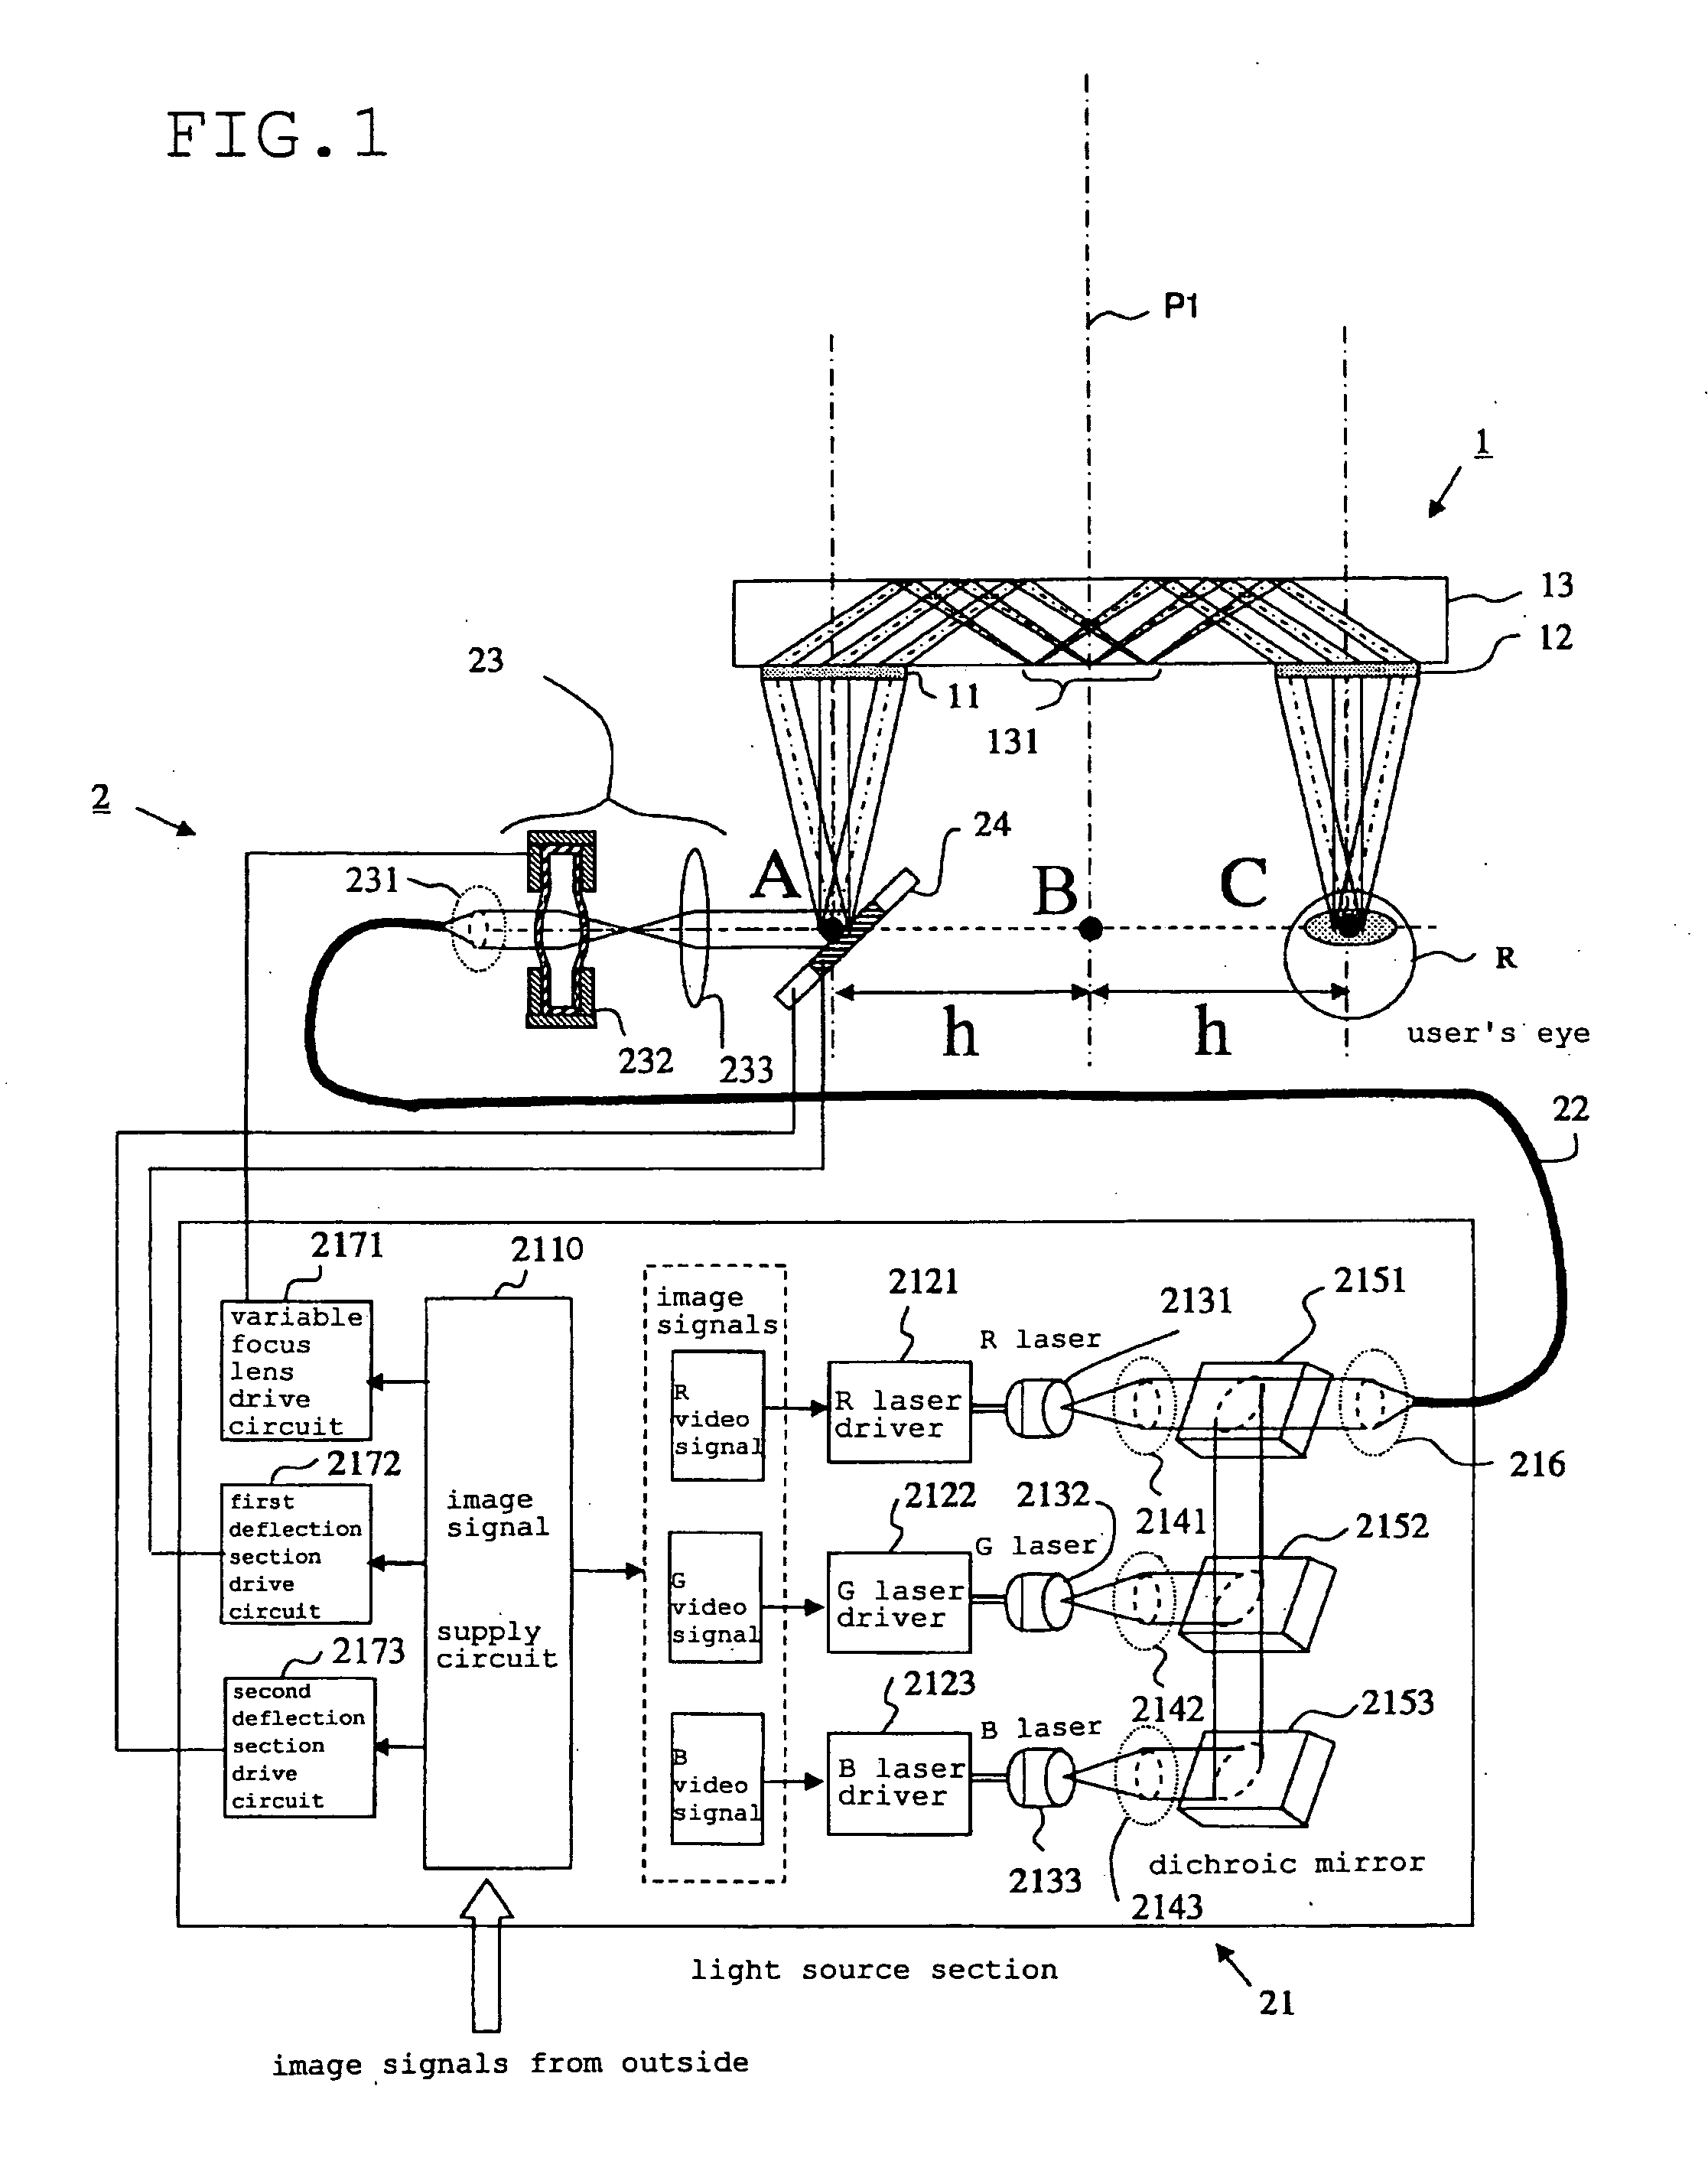 Optical system for light flux transfer, and retinal scanning display using such an optical system